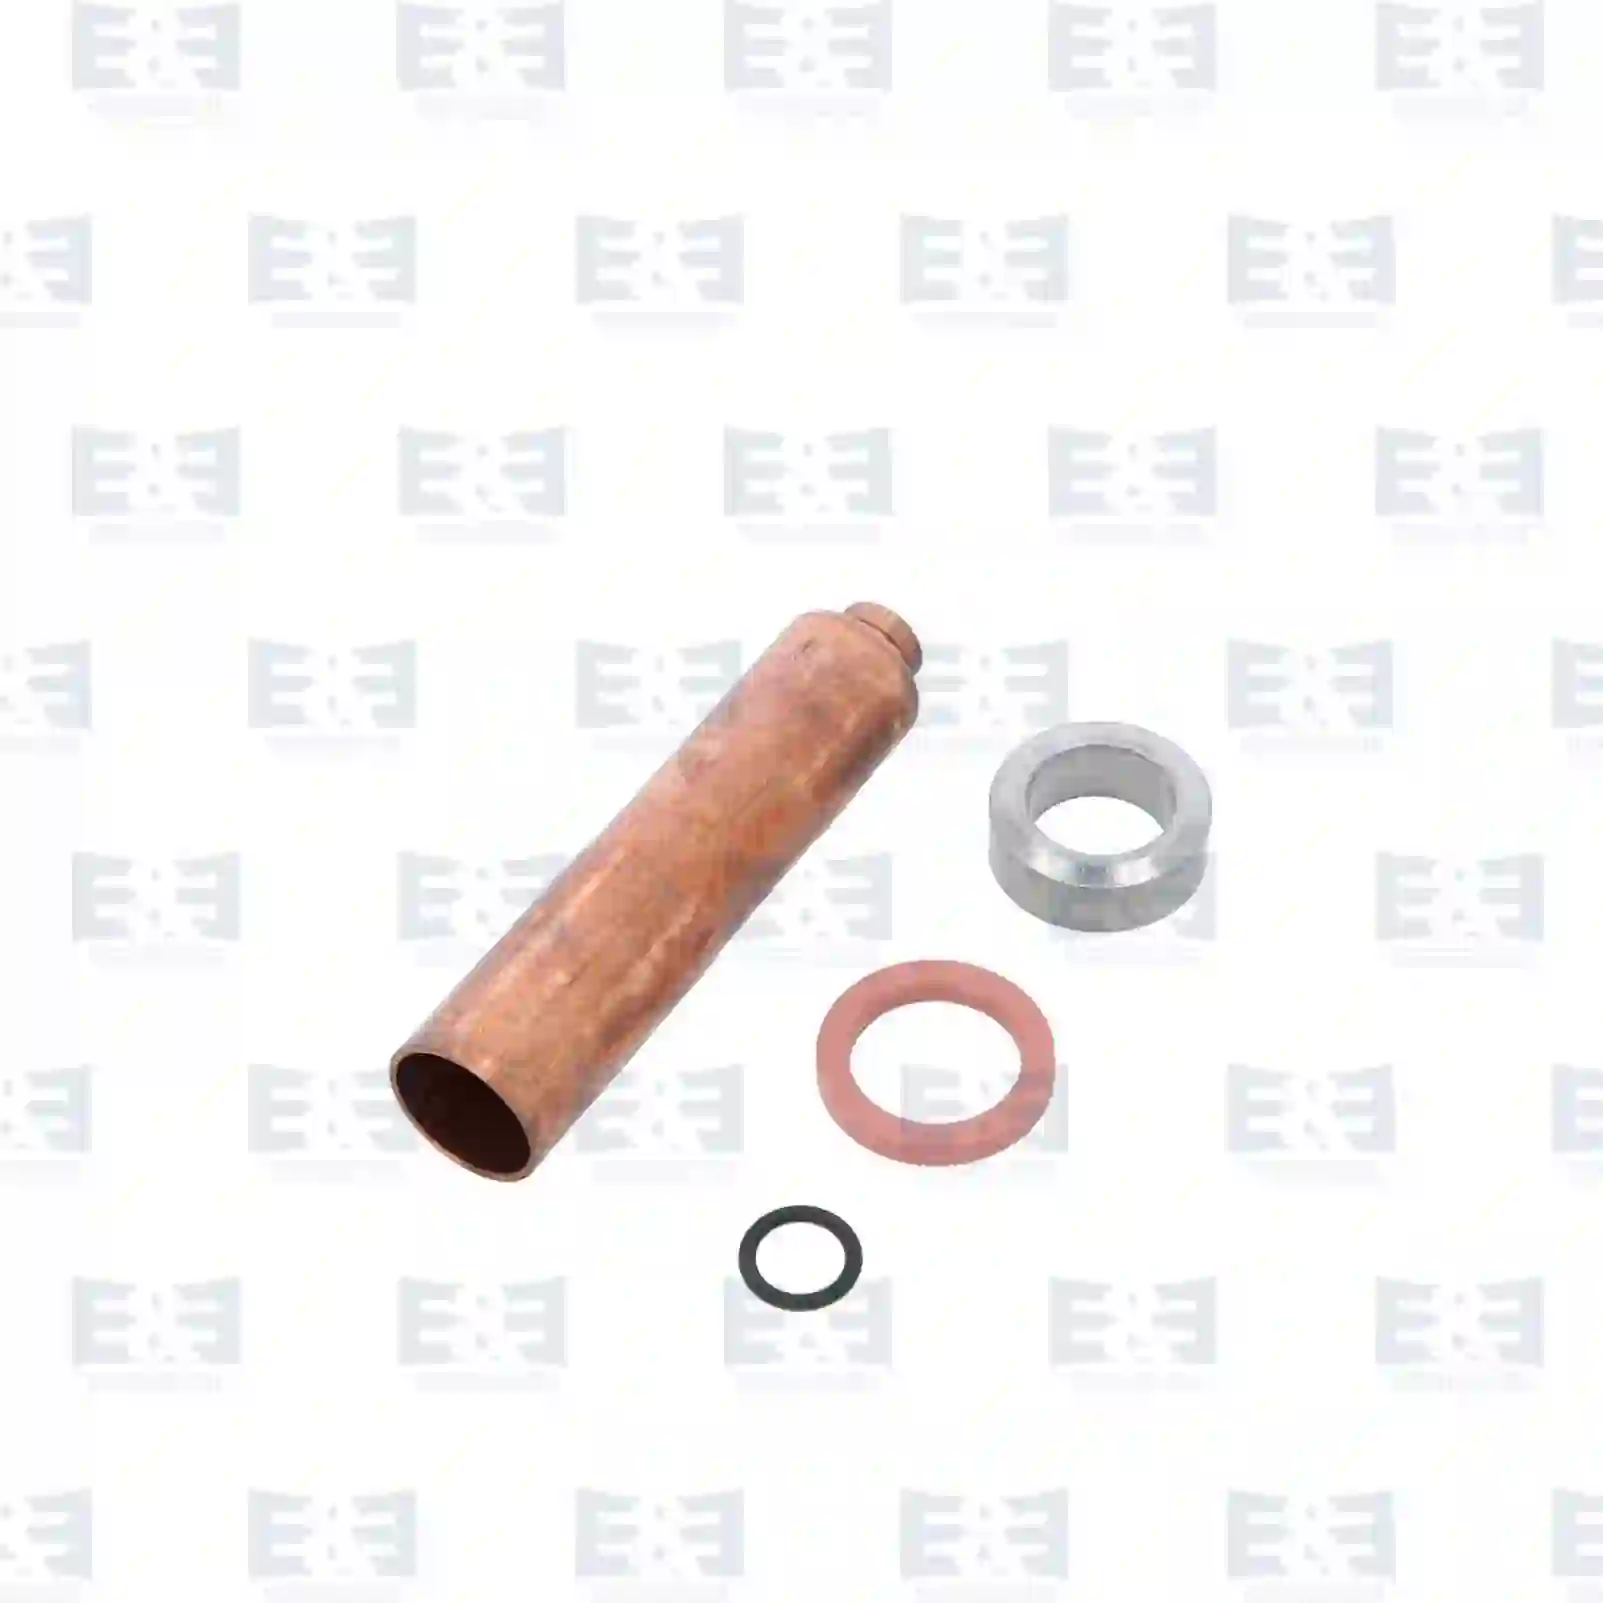  Injection sleeve kit || E&E Truck Spare Parts | Truck Spare Parts, Auotomotive Spare Parts